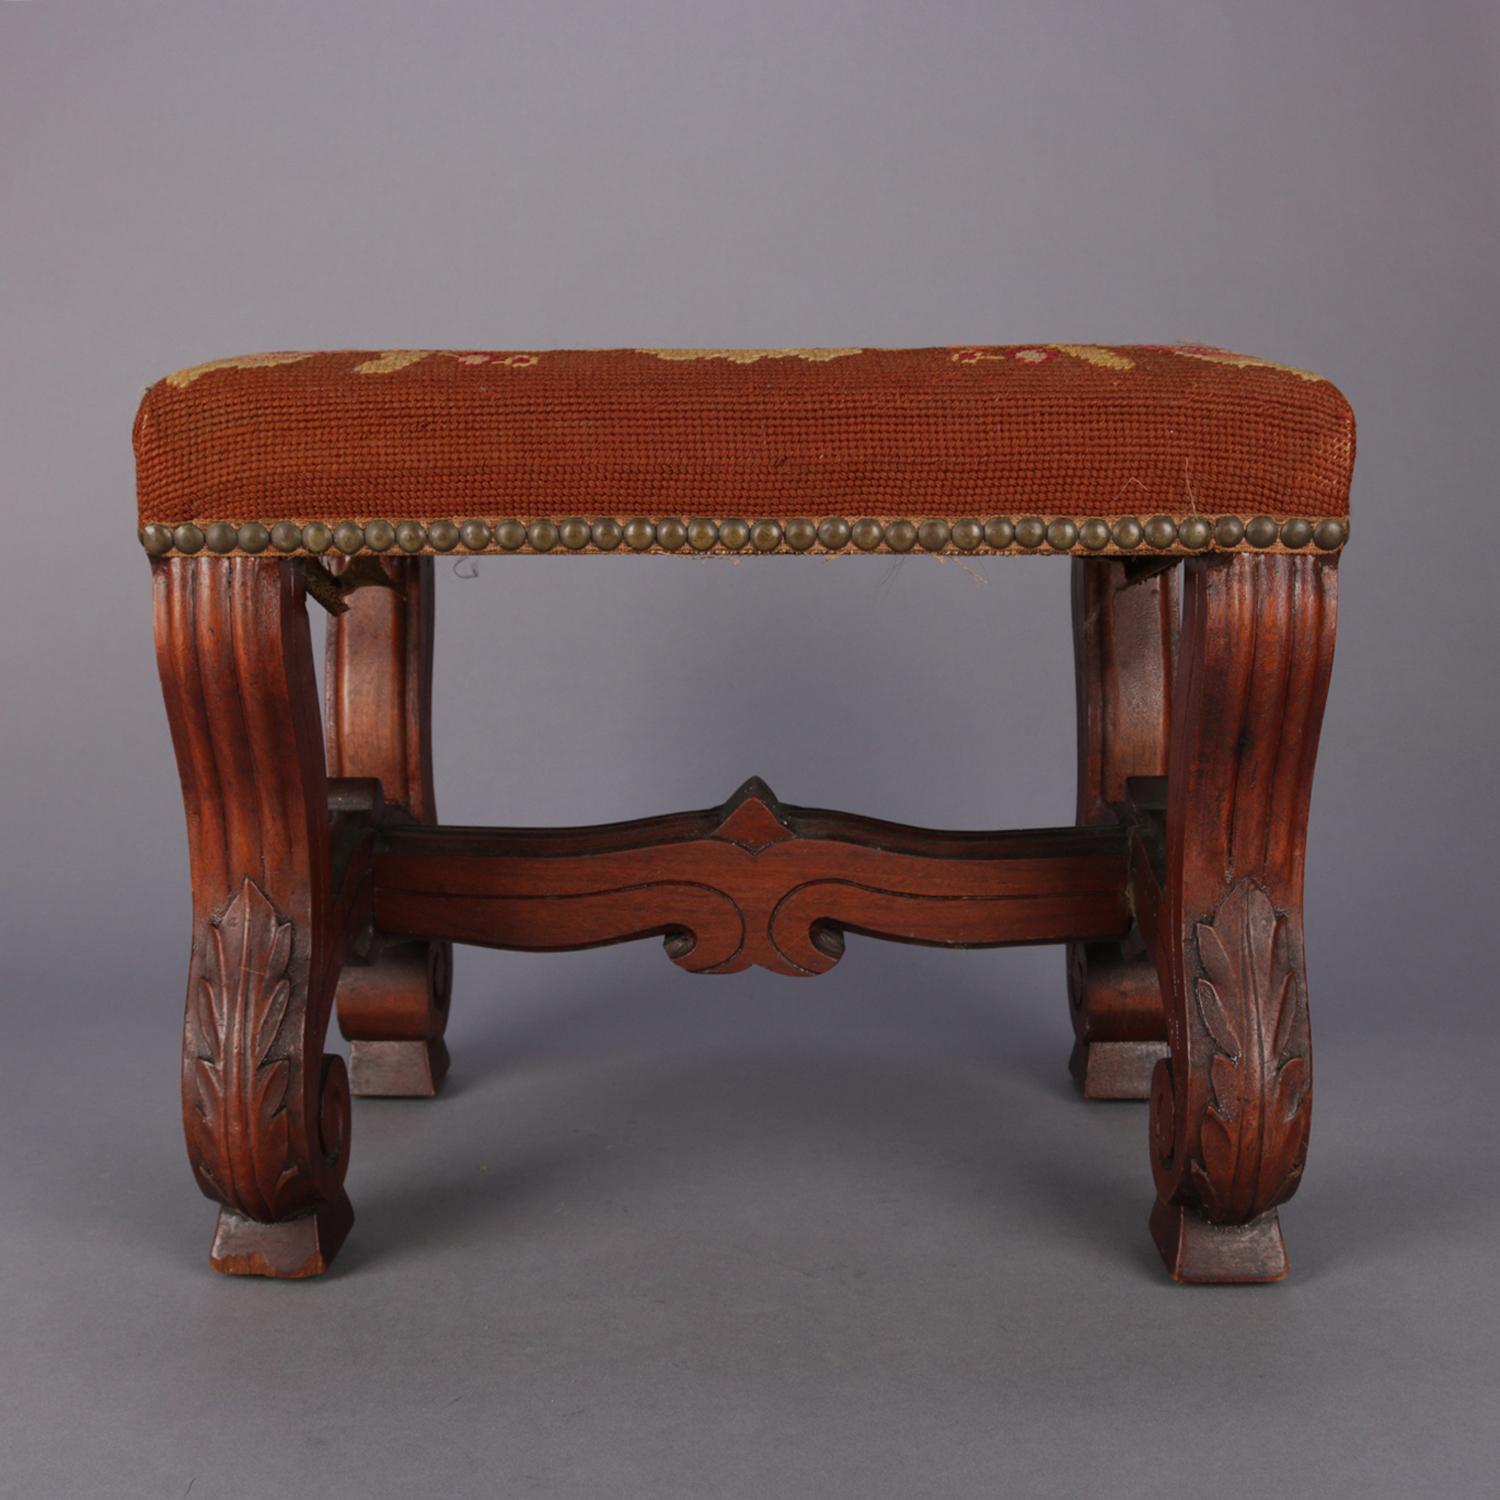 Hand-Carved Antique Continental Carved Walnut and Tapestry Footstool, circa 1850